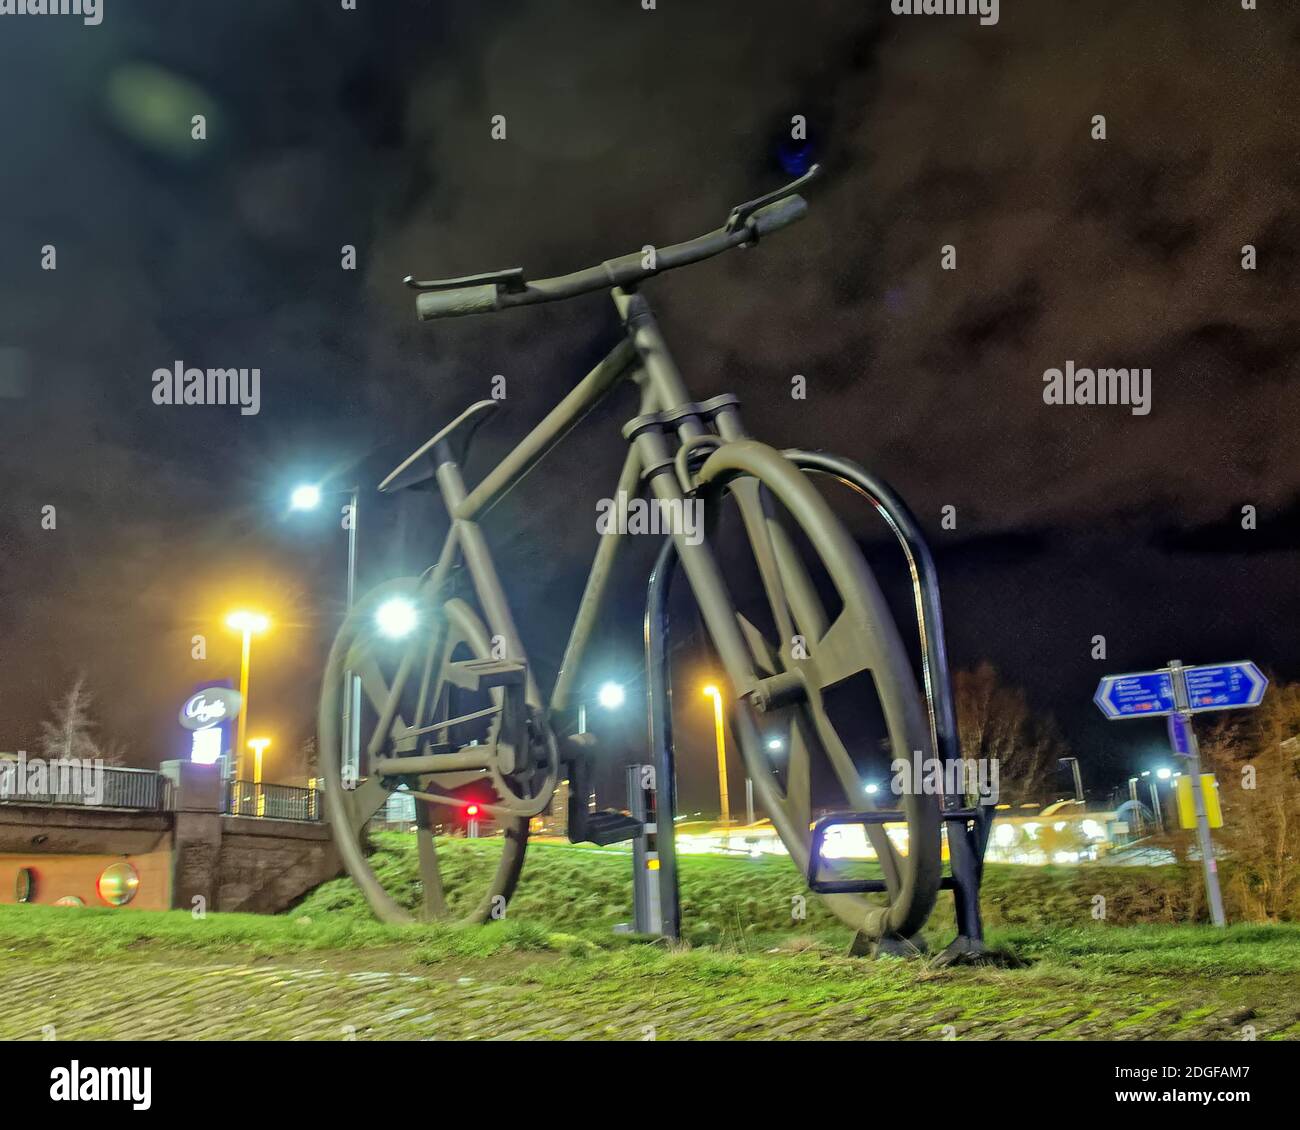 Clydebank, Glasgow, Scotland, UK. 9th December, 2020. UK Weather: Cold, damp on the Forth and clyde canal the flying swan bridge and the Bankies bicycle statue featuring the biggest bike lock in the world are in the early morning darkness of winter  .Credit: Gerard Ferry/Alamy Live News Stock Photo